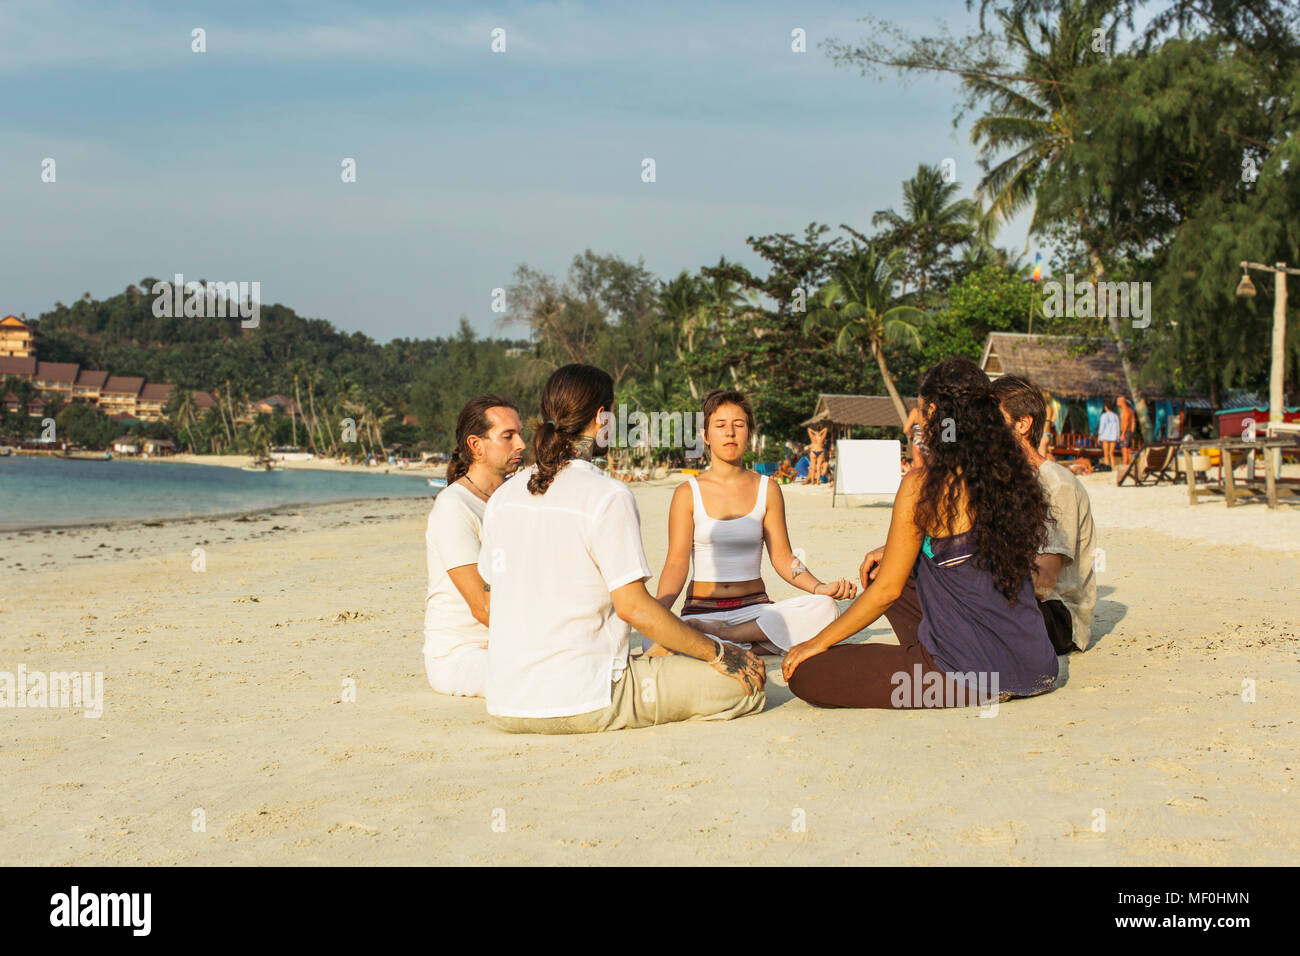 Thailand, Koh Phangan, group of people meditating together on a beach Stock Photo